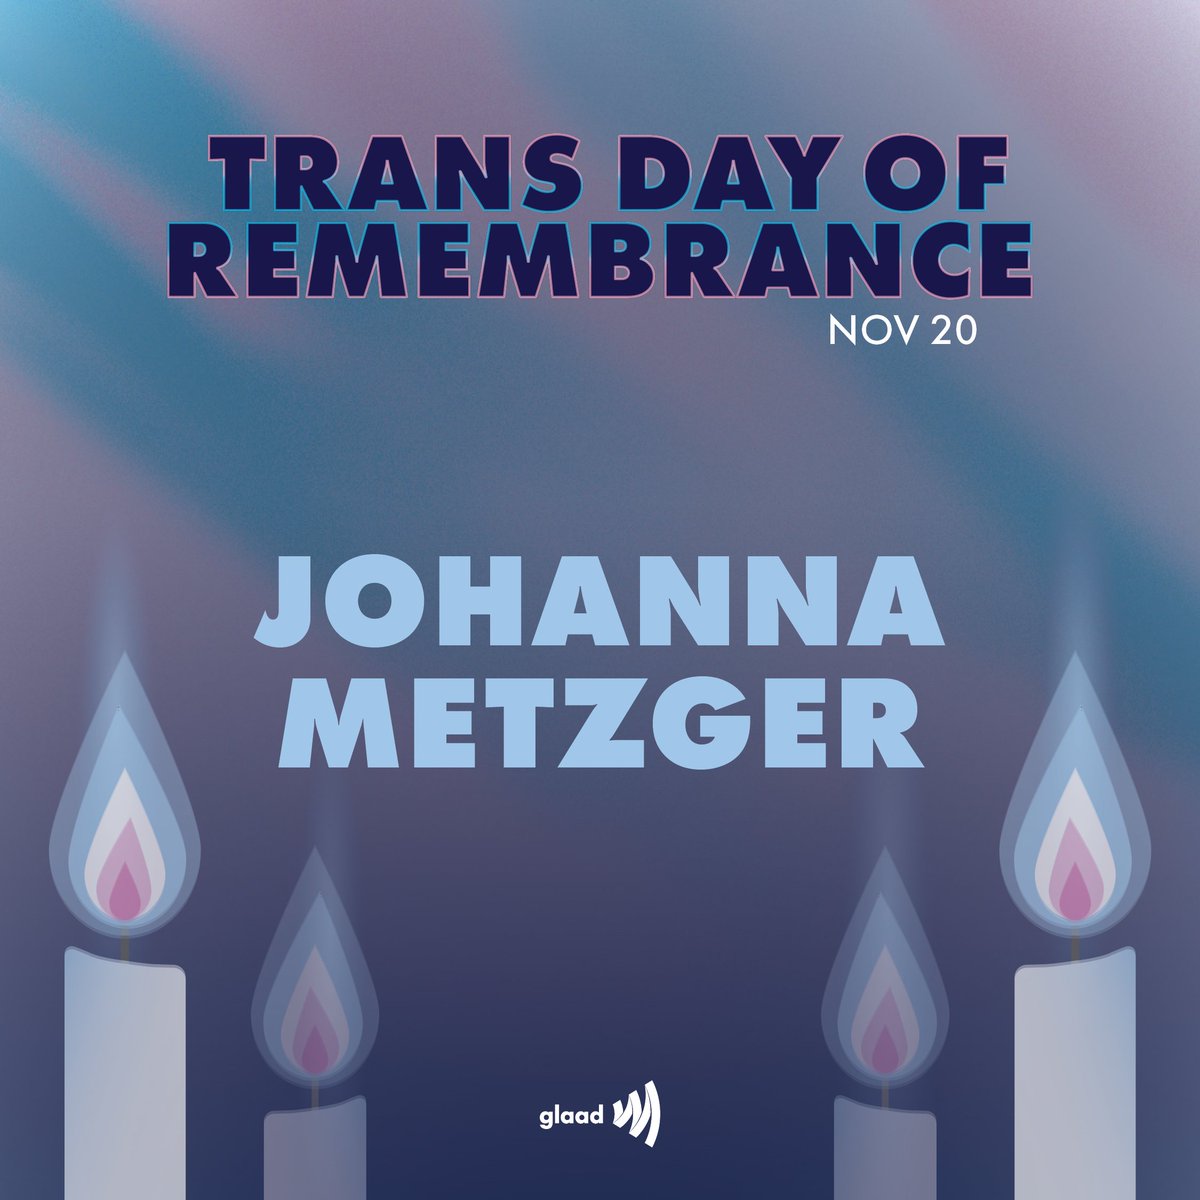 Johanna Metzger, a transgender woman, was killed in Baltimore, Maryland on April 11, 2020. She was known for her love of music and taught herself to play multiple instruments.